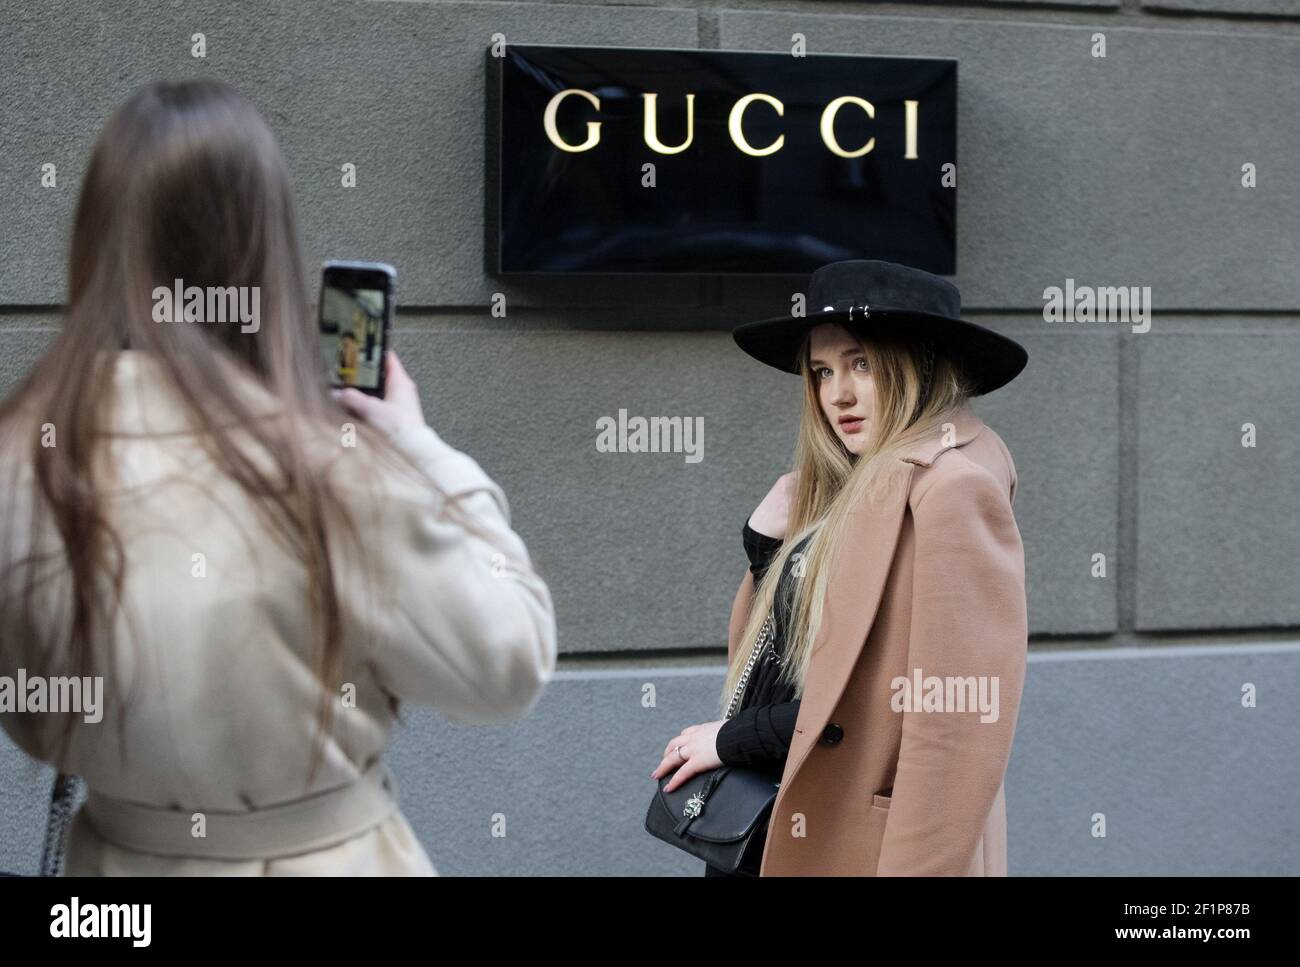 Apt evalueren Een deel Kiev, Ukraine. 06th Mar, 2021. A young woman poses for a photo in front of  Gucci logo, of a luxury fashion house, outside a Gucci brand store. Credit:  SOPA Images Limited/Alamy Live